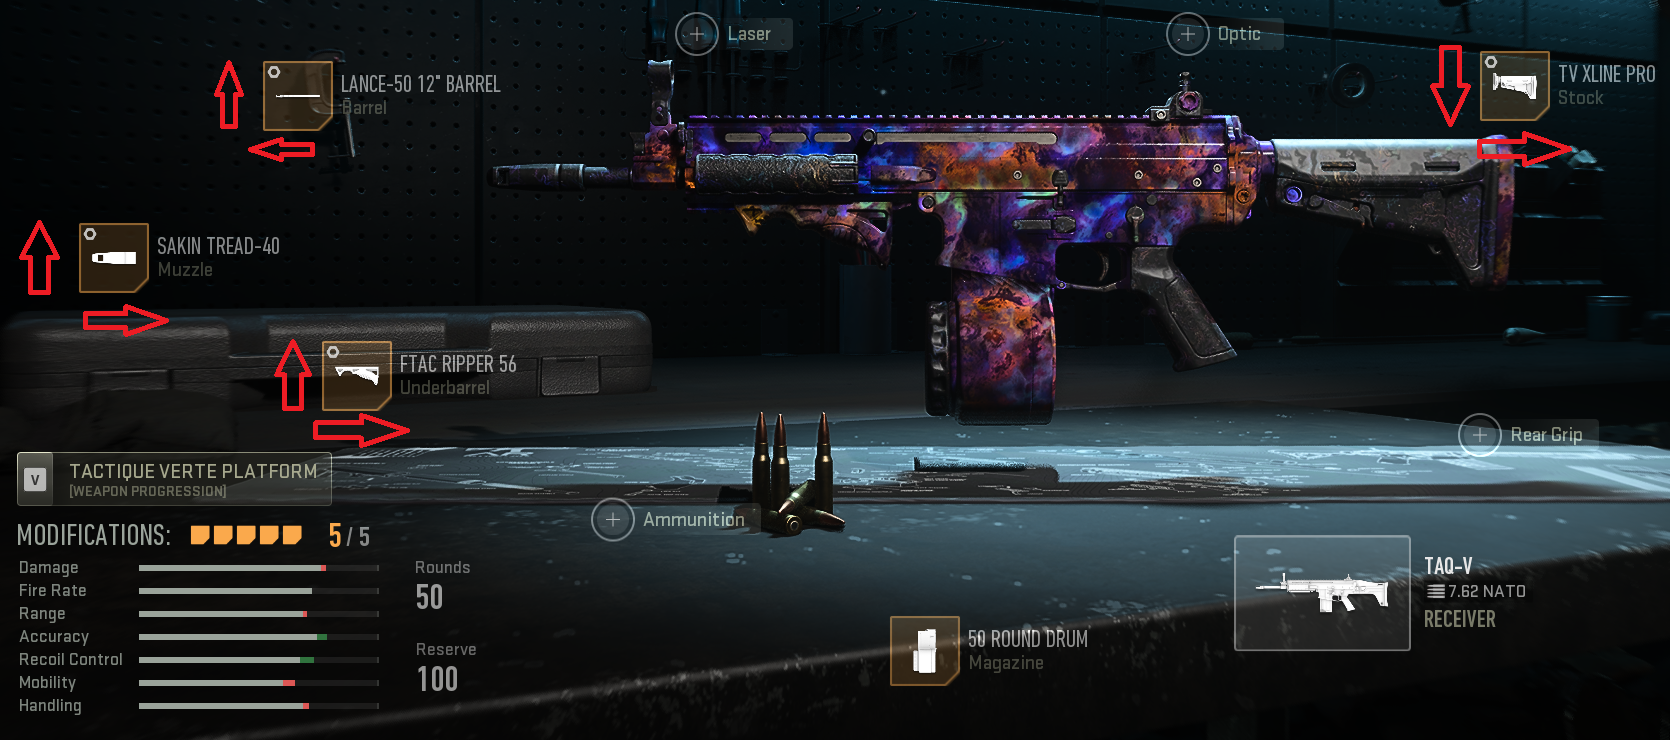 Low recoil, fast ads speed TAQ-V loadout image 1